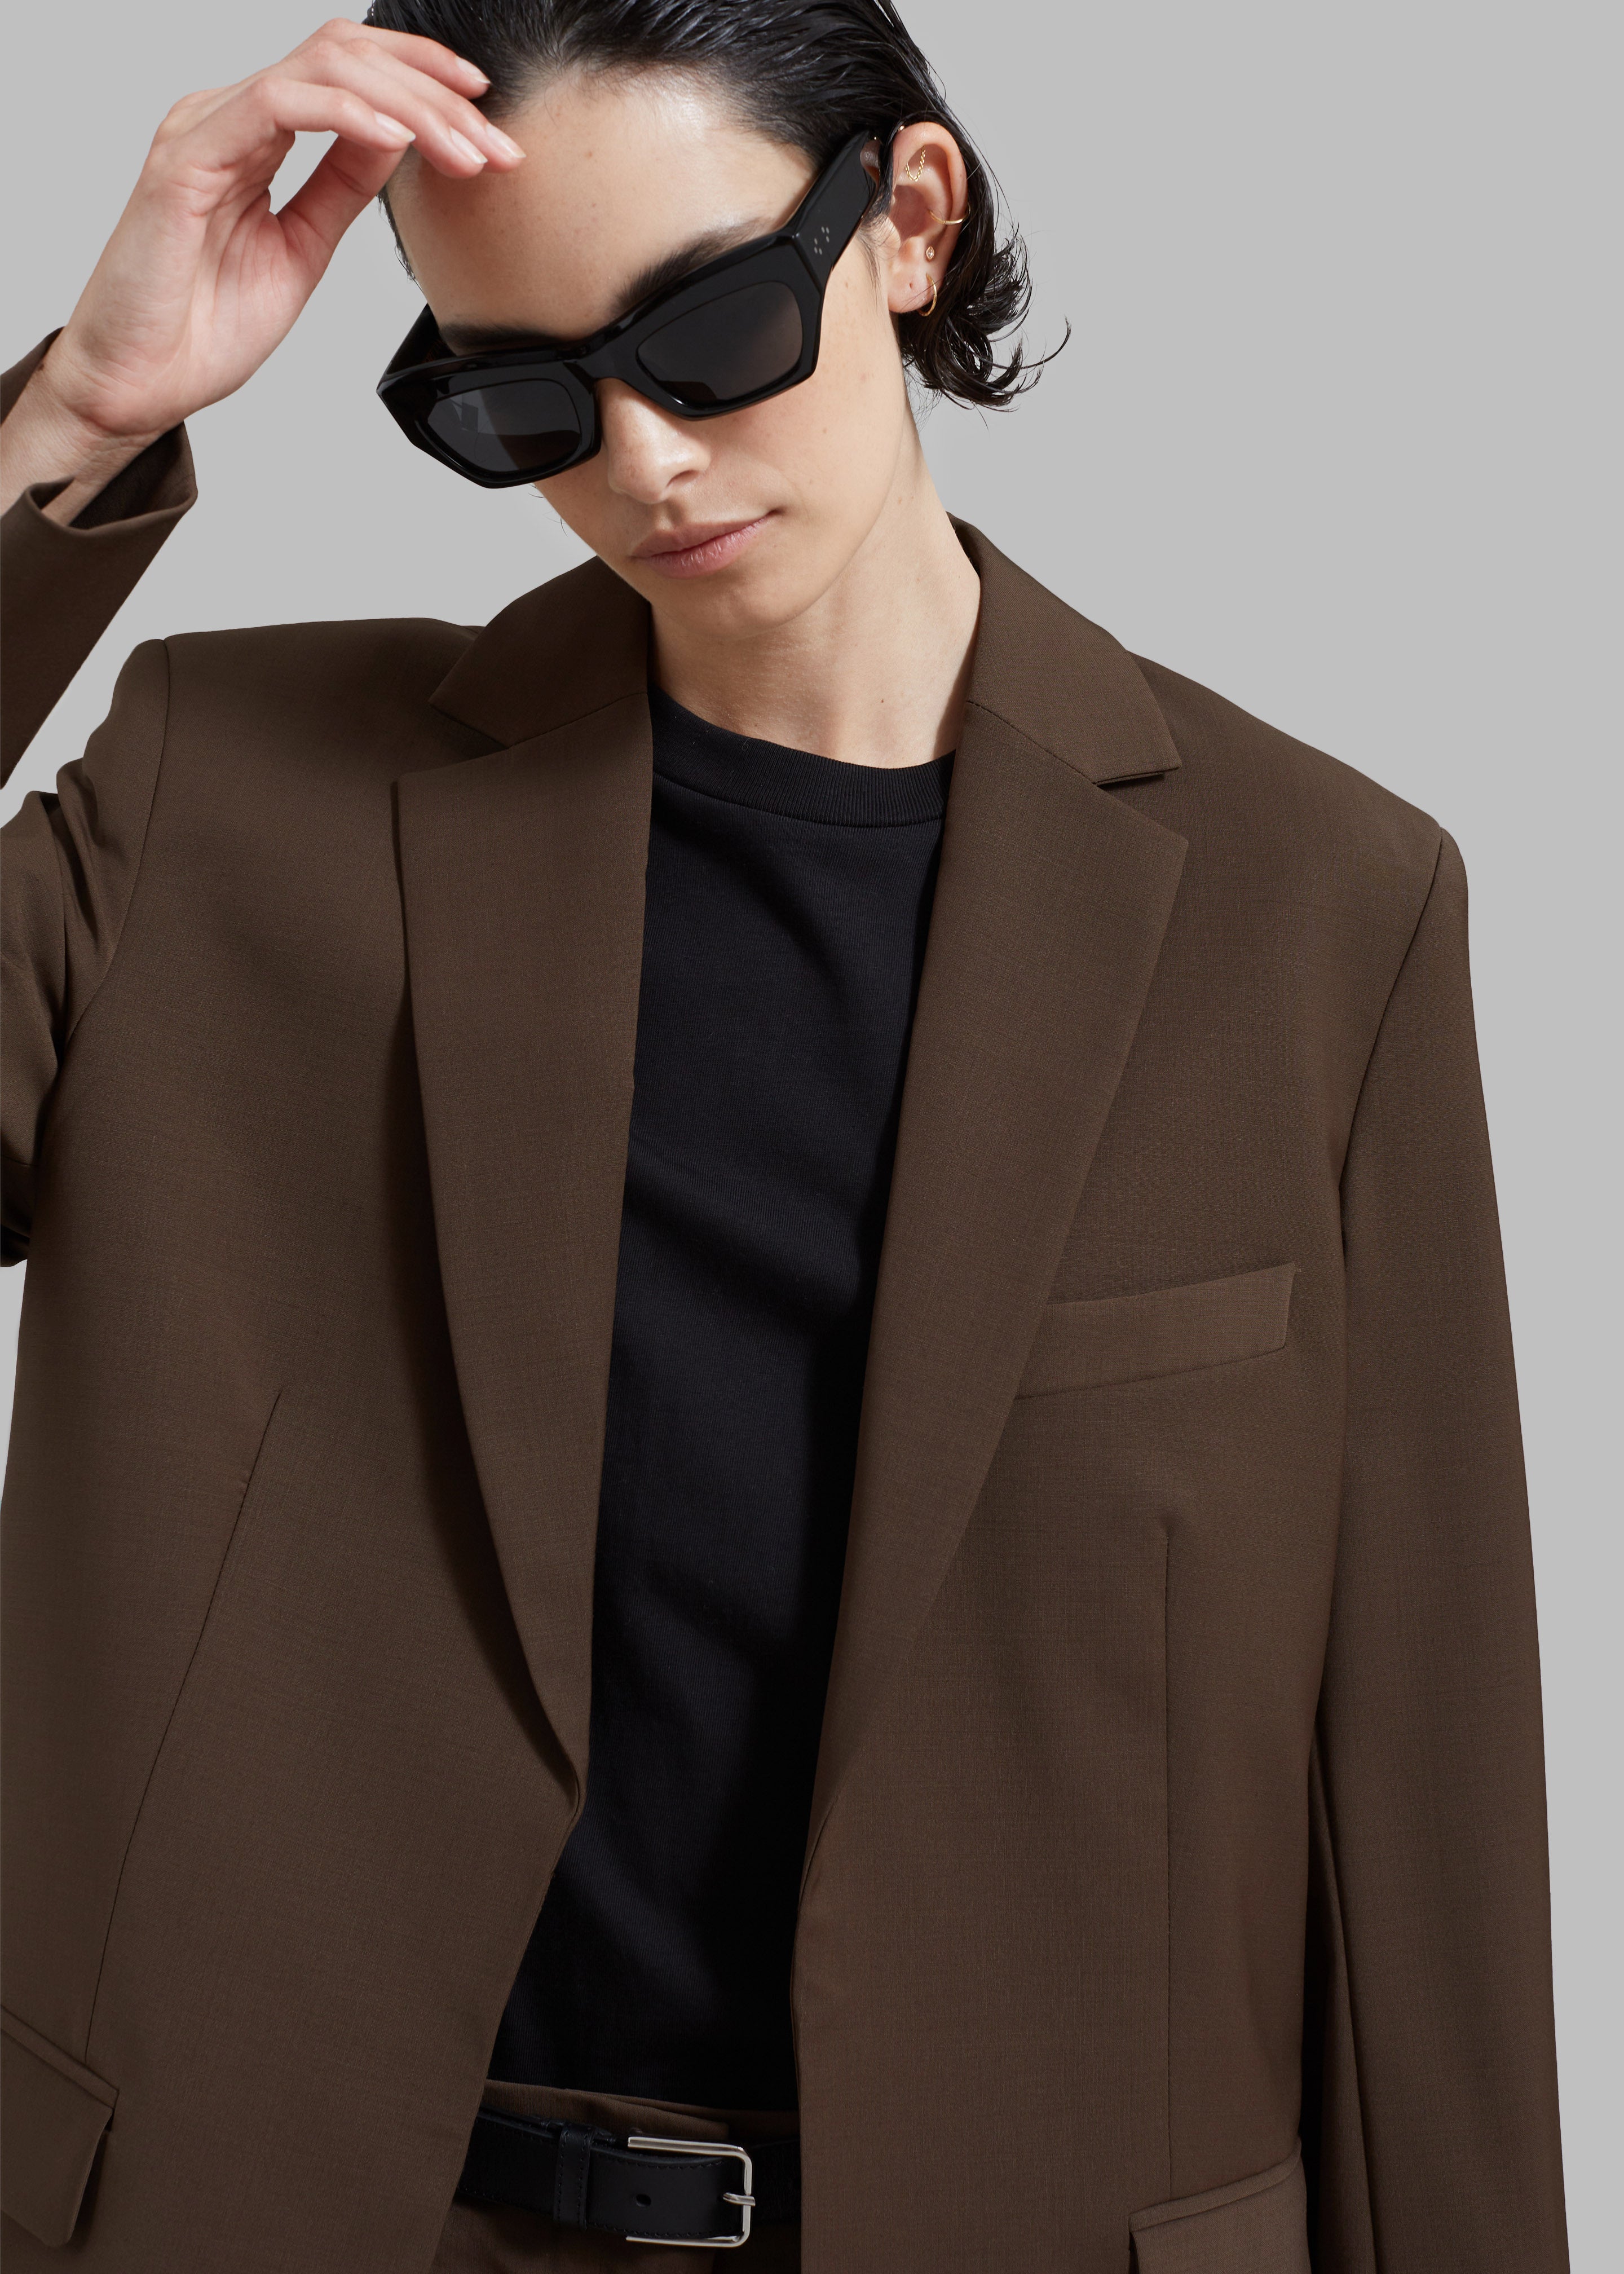 Matteau Relaxed Tailored Blazer - Coffee - 6